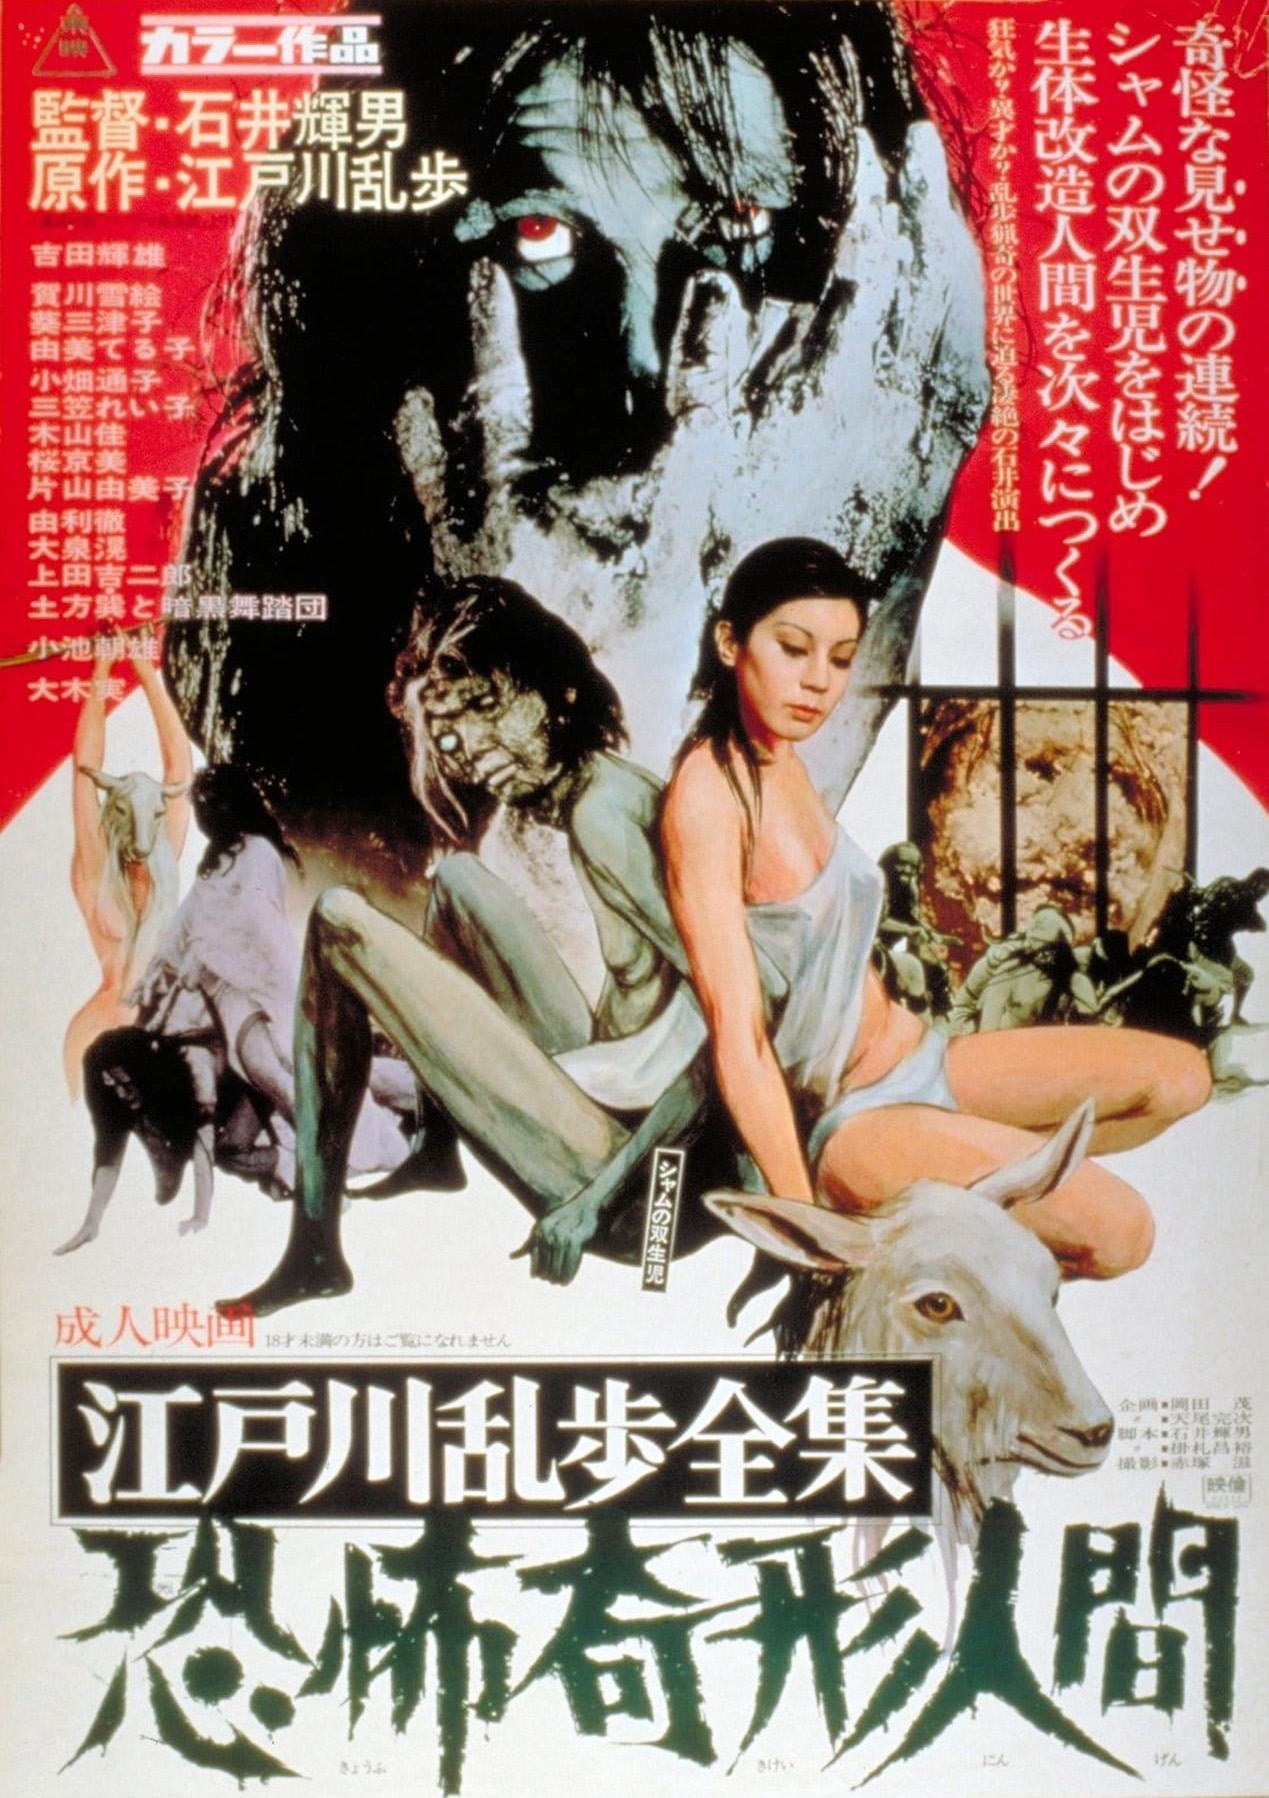 Horrors of Malformed Men (1969) with English Subtitles on DVD on DVD